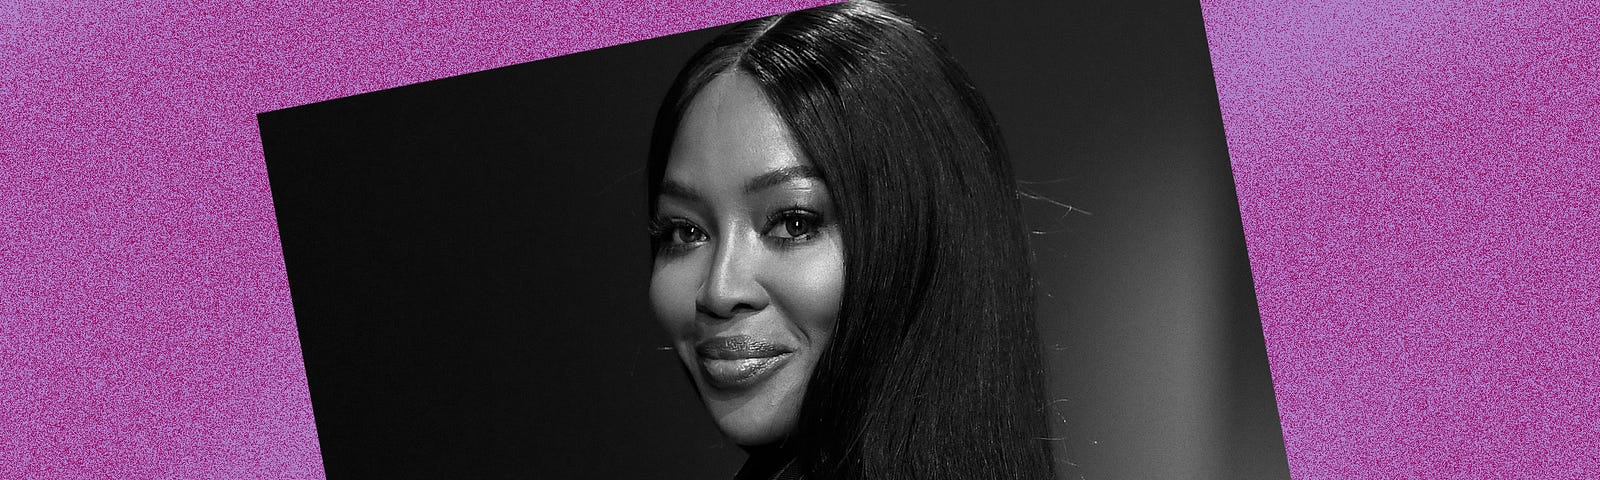 Black and white photo of Naomi Campbell against a violet background.